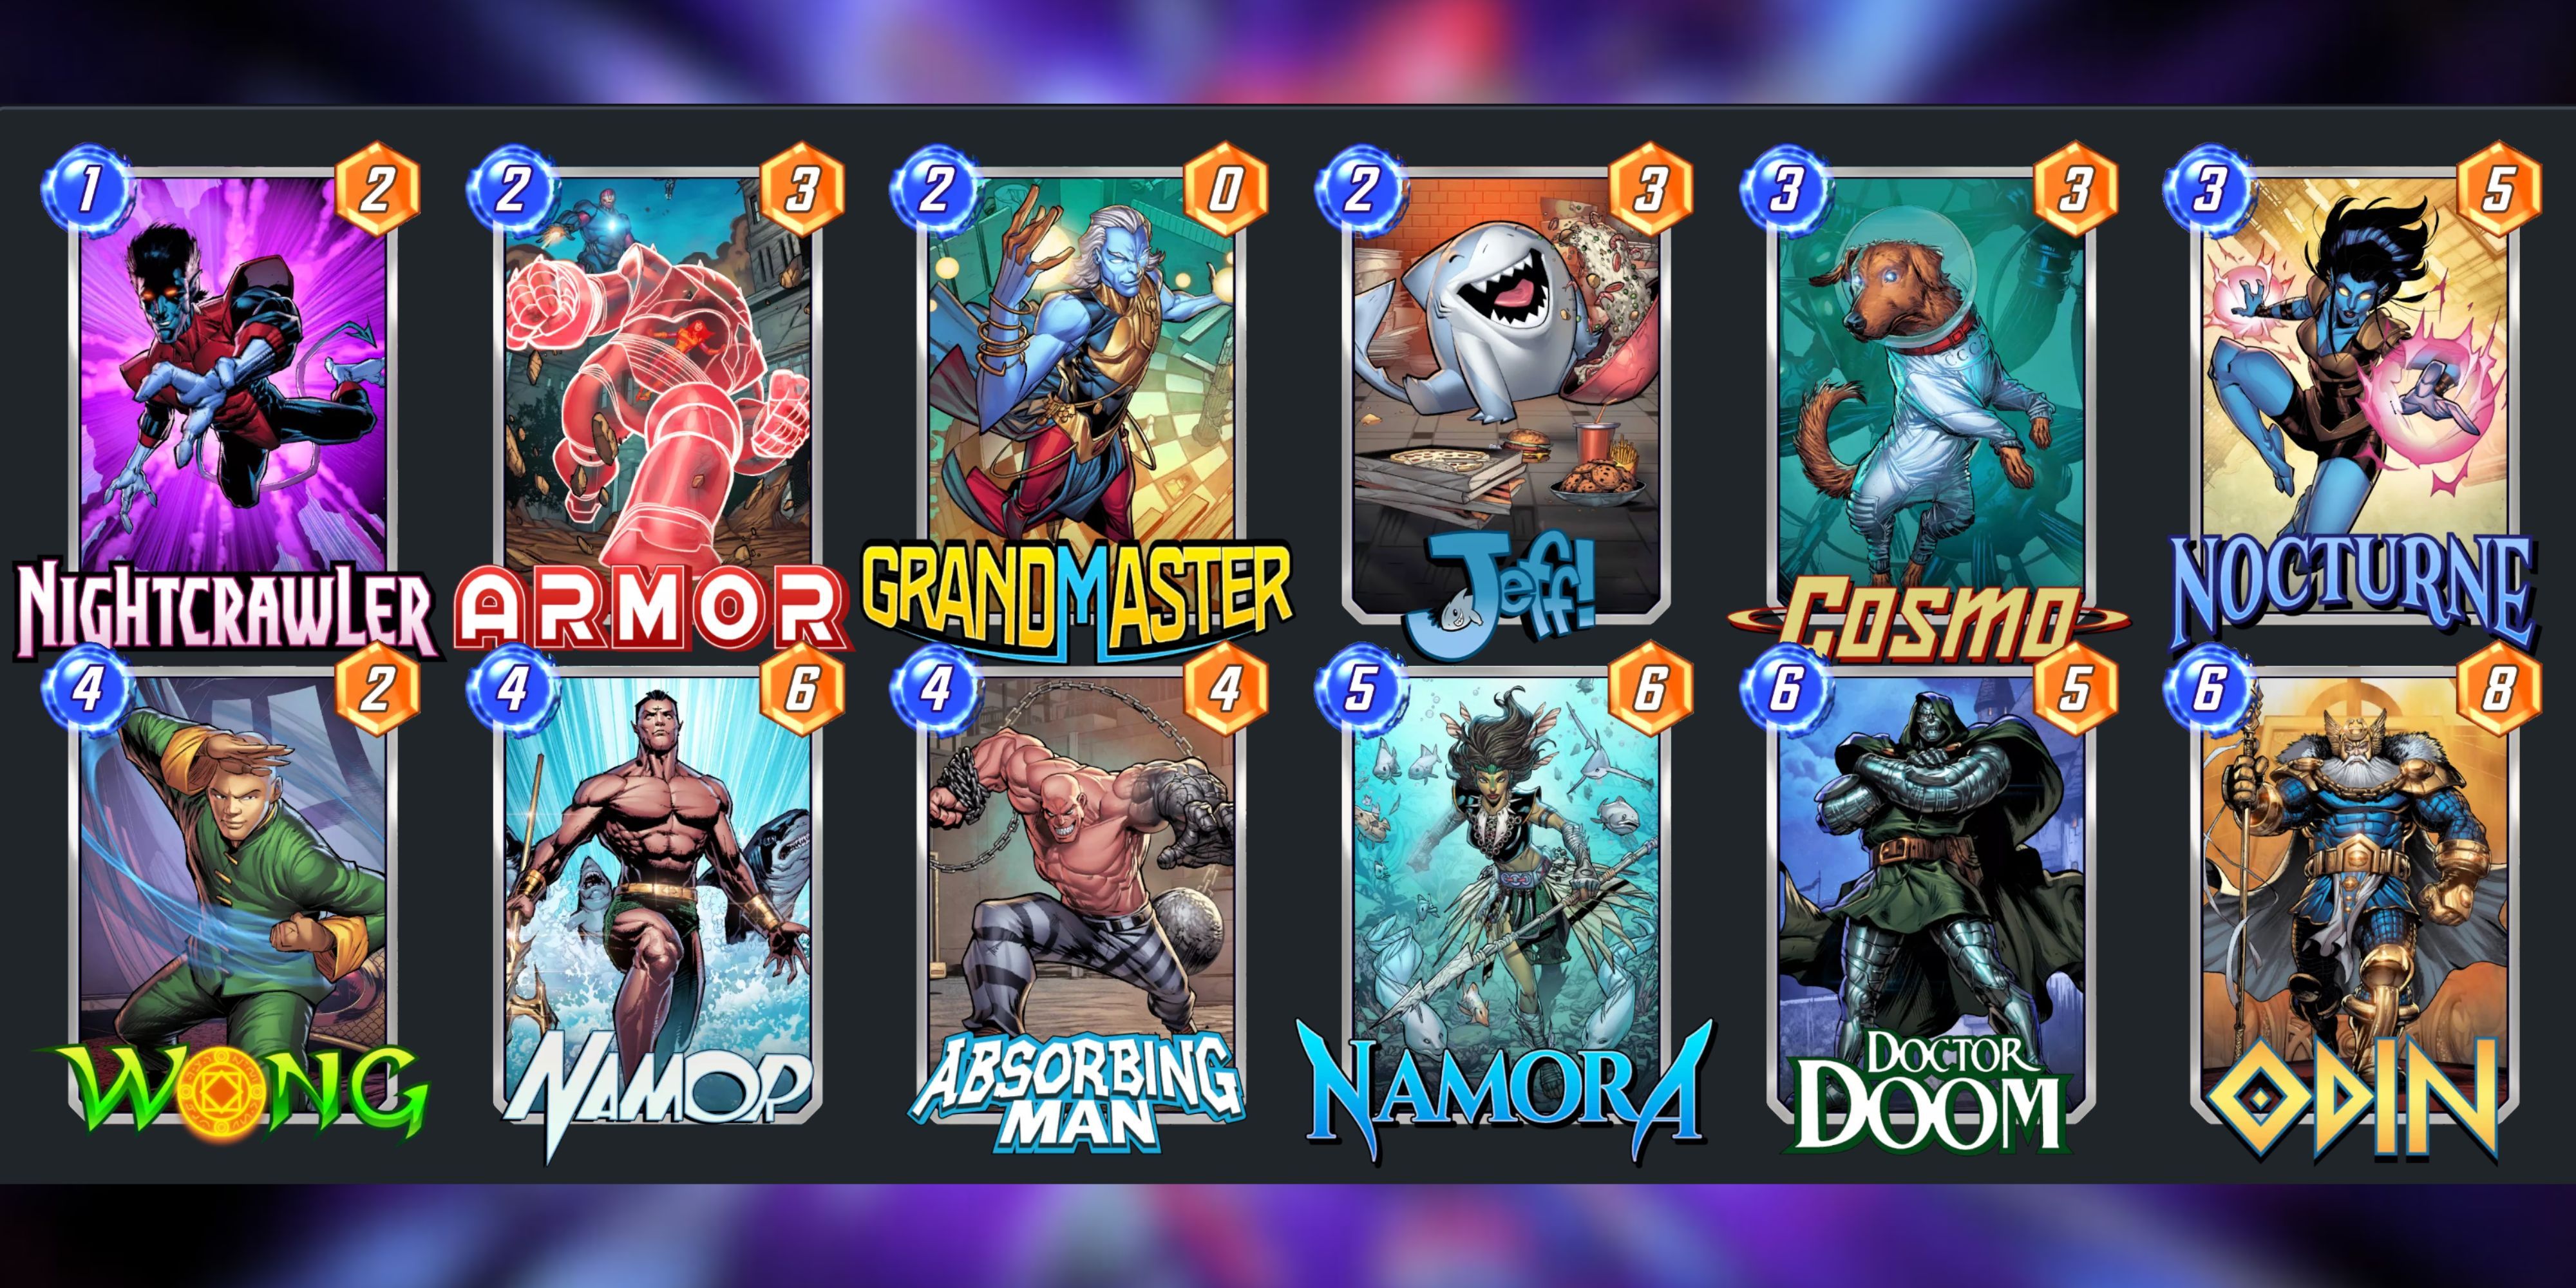 A great deck for Marvel Snap's Namora.